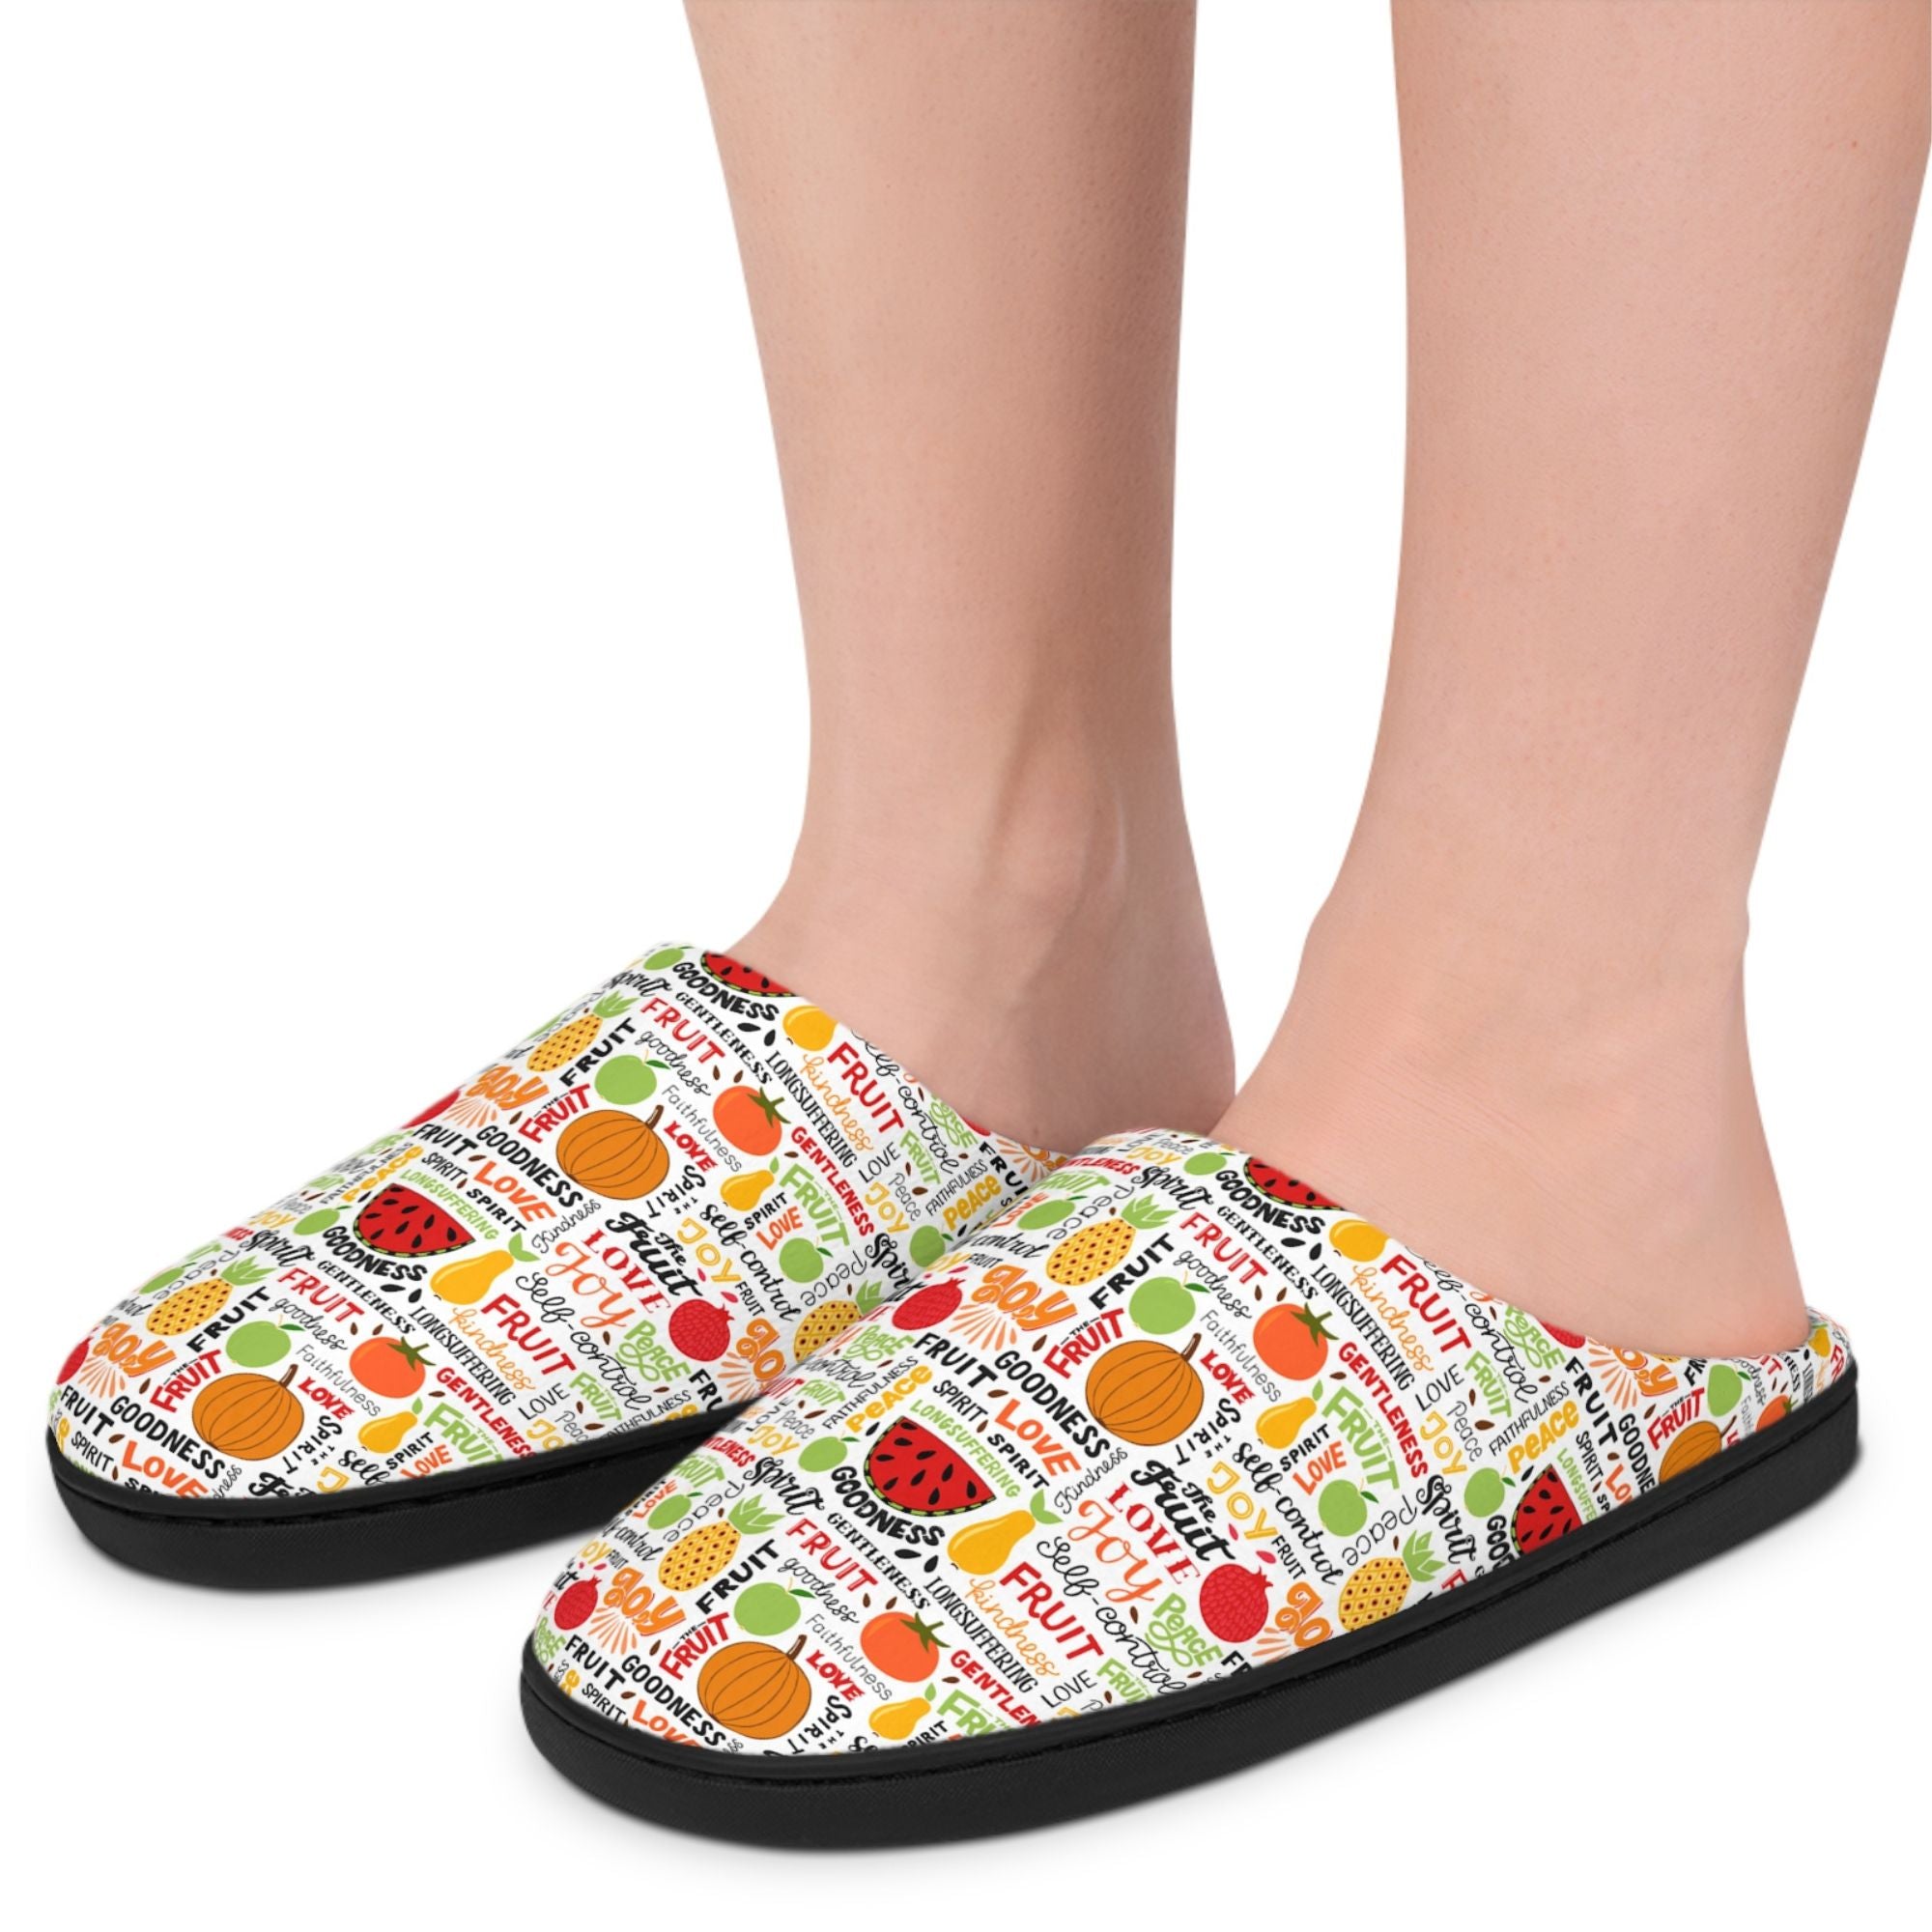 Fruit of the Spirit Women's Indoor Slippers - Matching Pajama Set and Lounge / Pajama Pants Available Size: US 7 - 8 Color: Black sole Jesus Passion Apparel